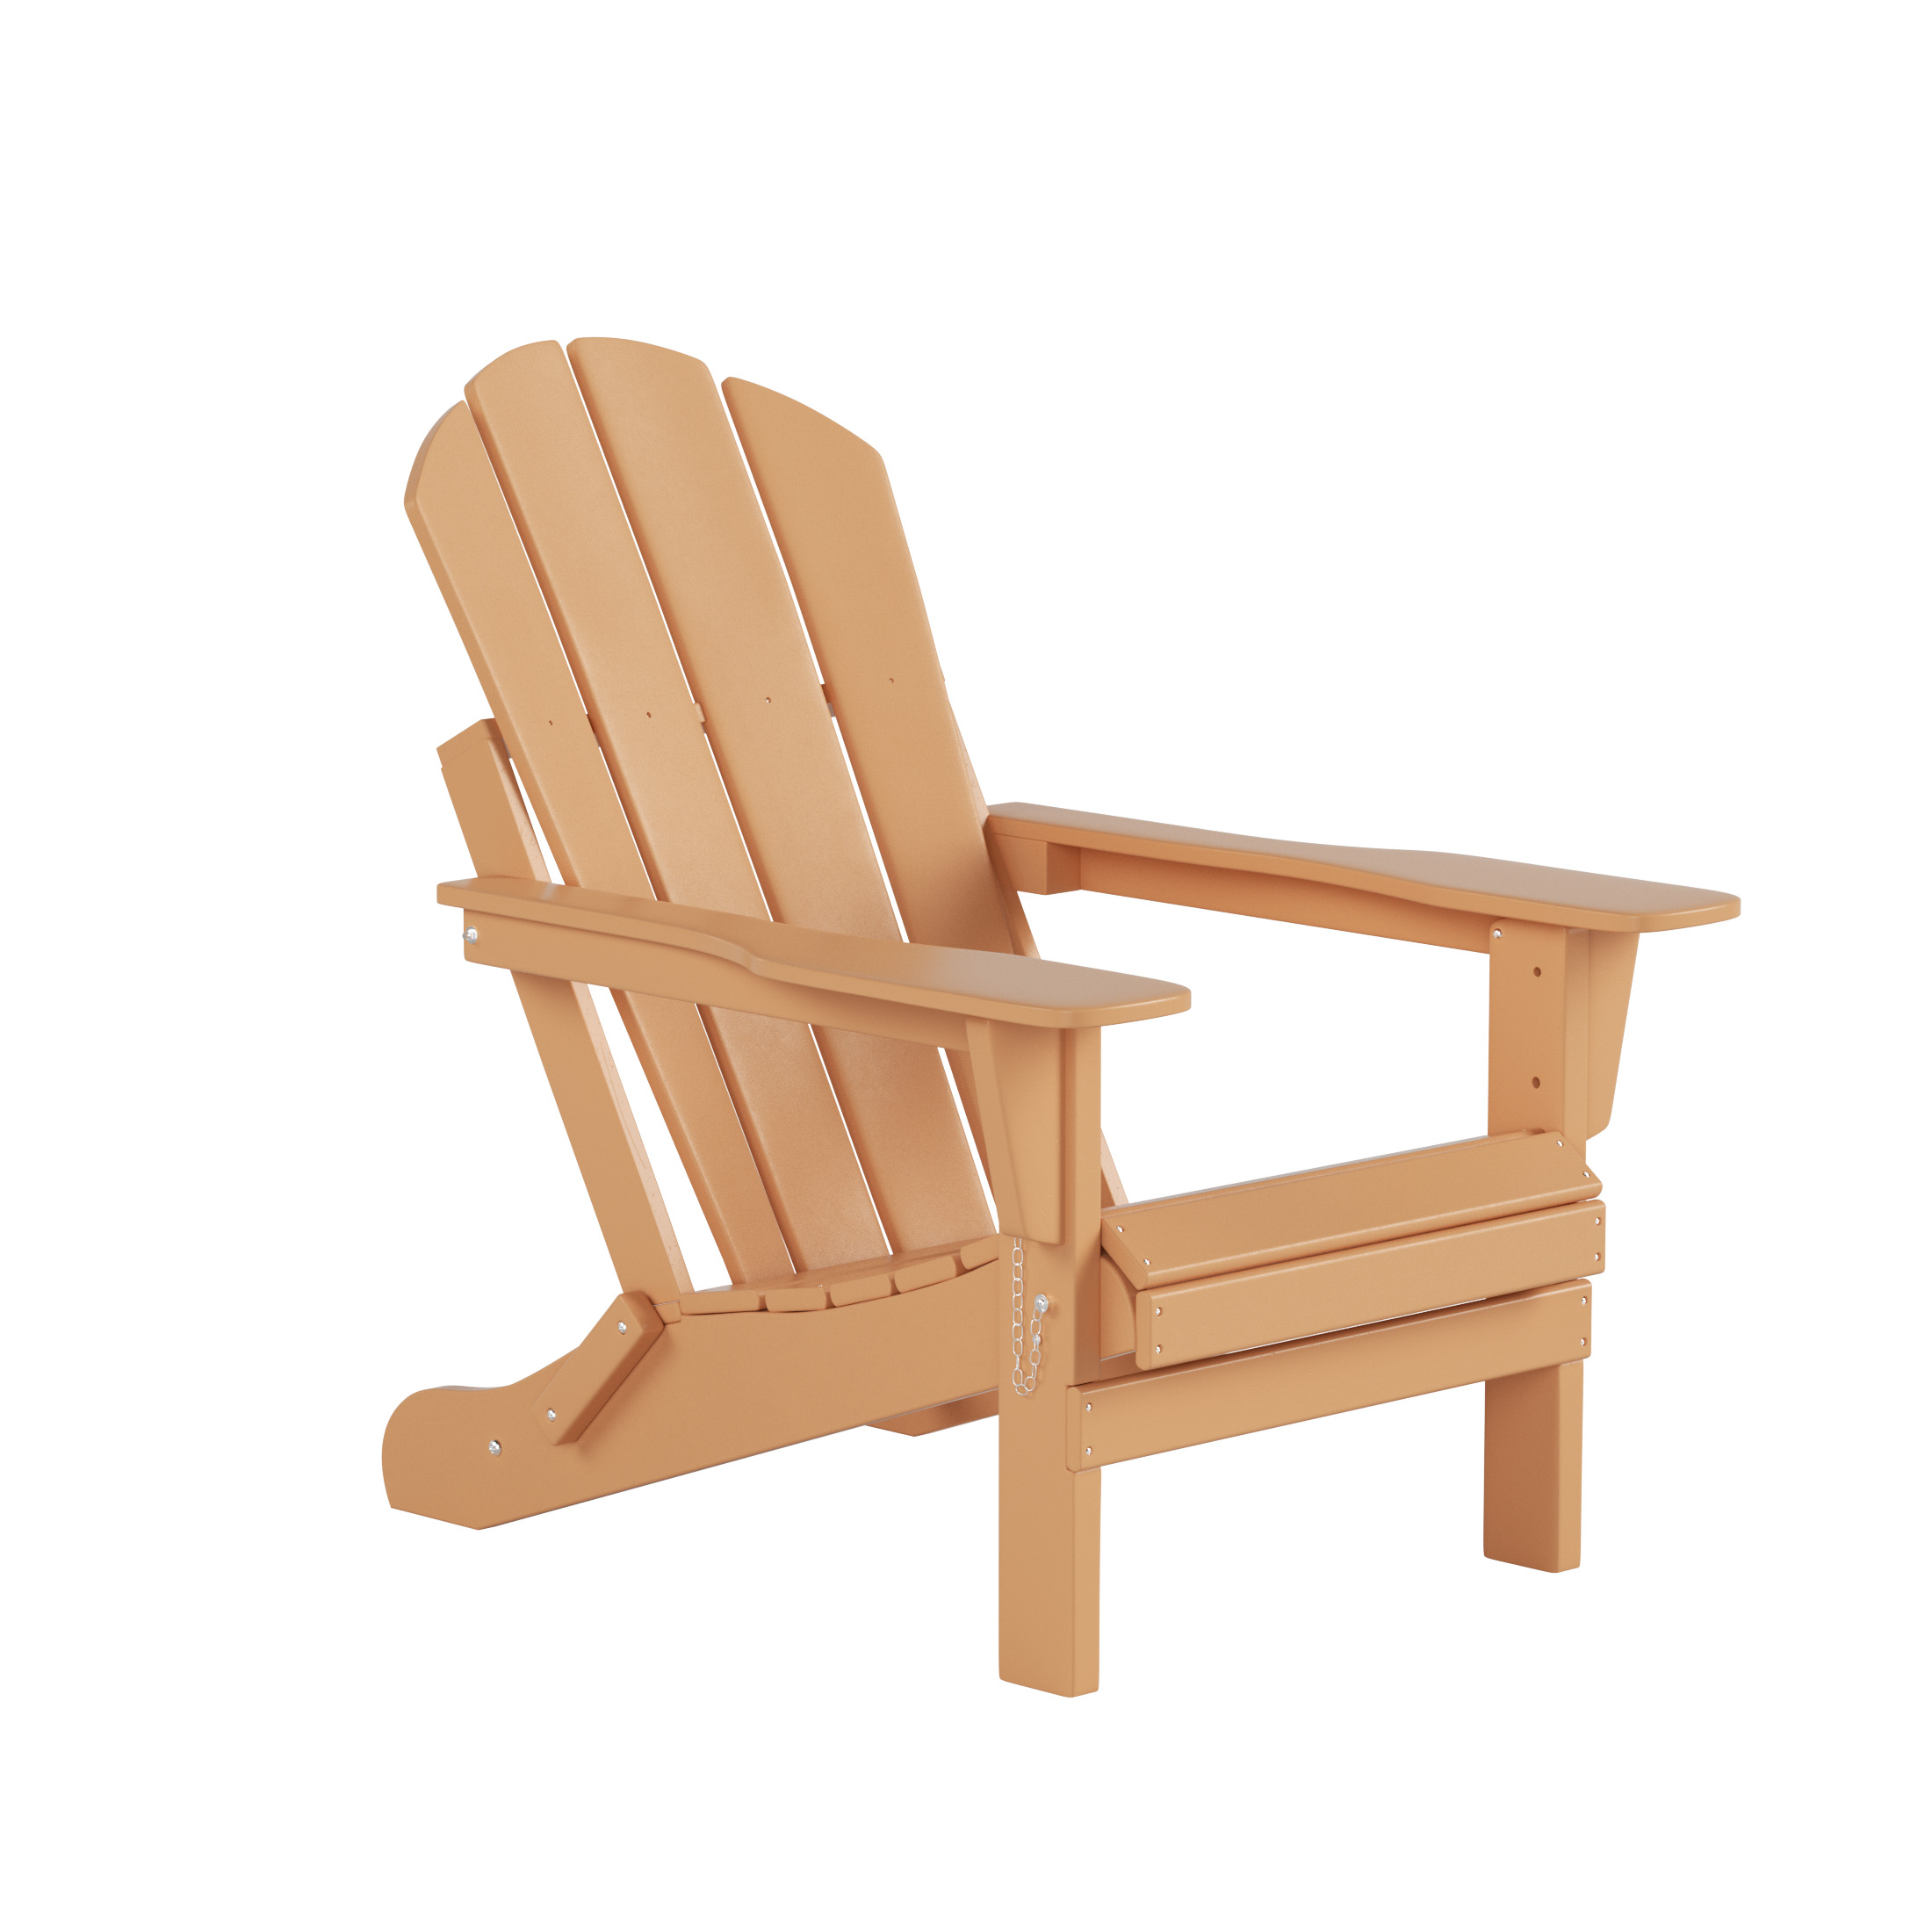 WestinTrends Malibu 2-Pieces Adirondack Chair Set with Side Table, All Weather Outdoor Seating Plastic Patio Lawn Chair Folding for Outside Porch Deck Backyard, Teak - image 5 of 7